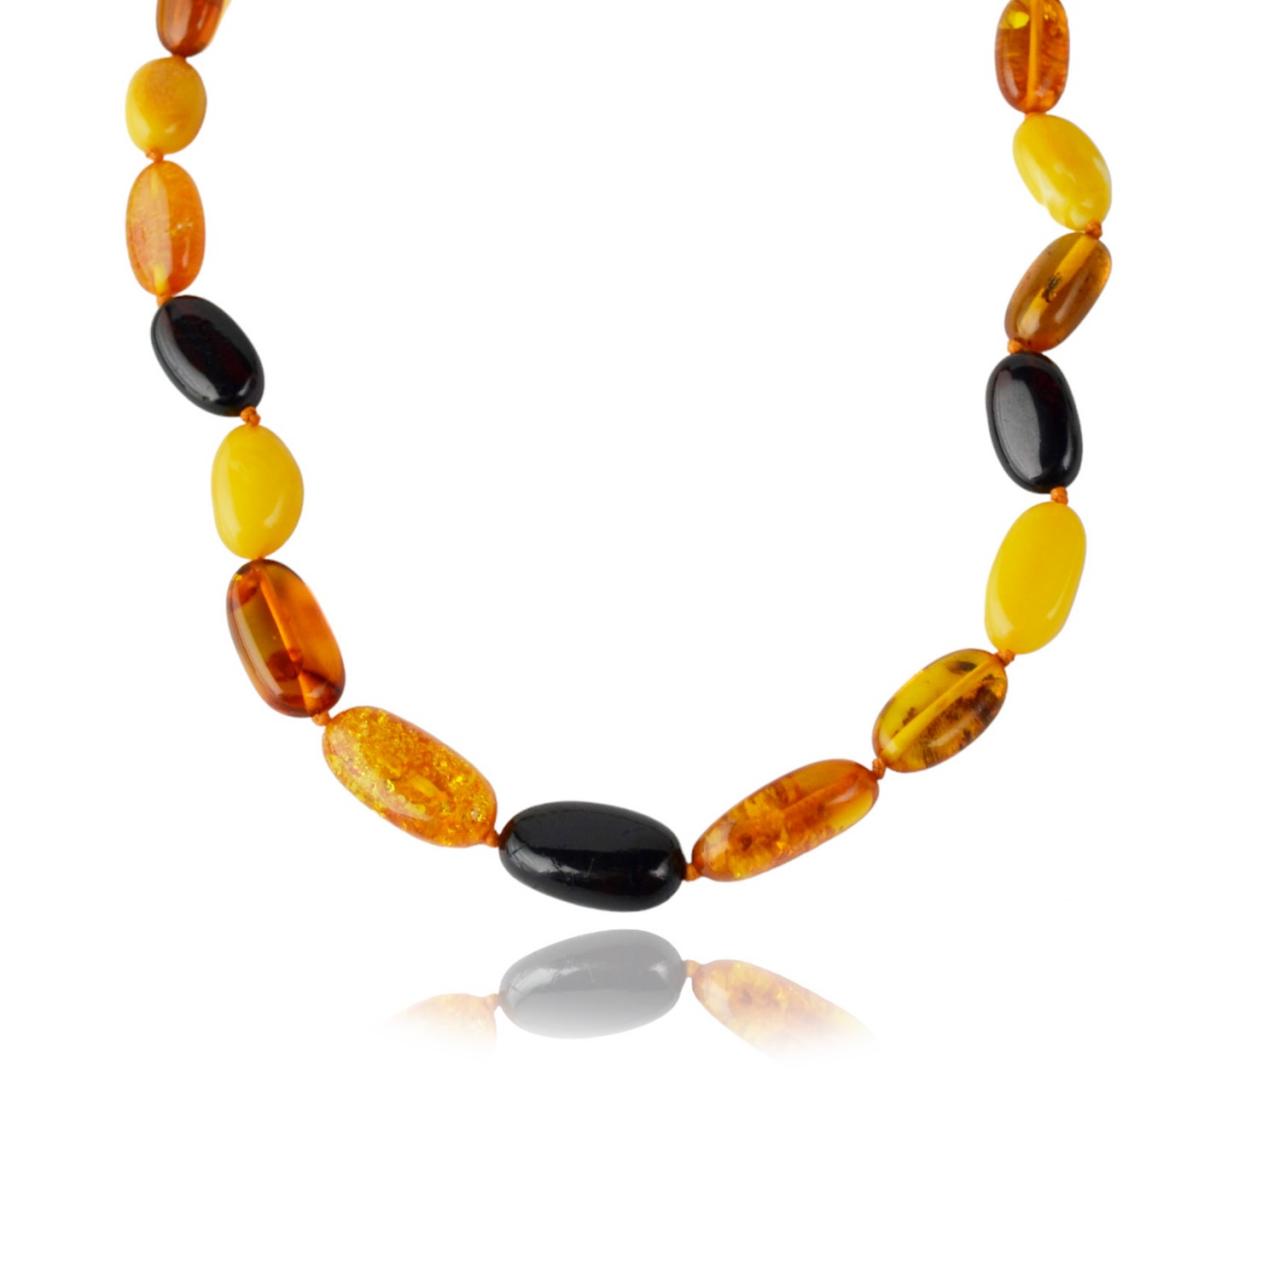 Baltic Amber Necklace With Olive Amber Beads Genuine Natural Baltic Amber Jewelry For Women Or Men | Maritavita | Da74